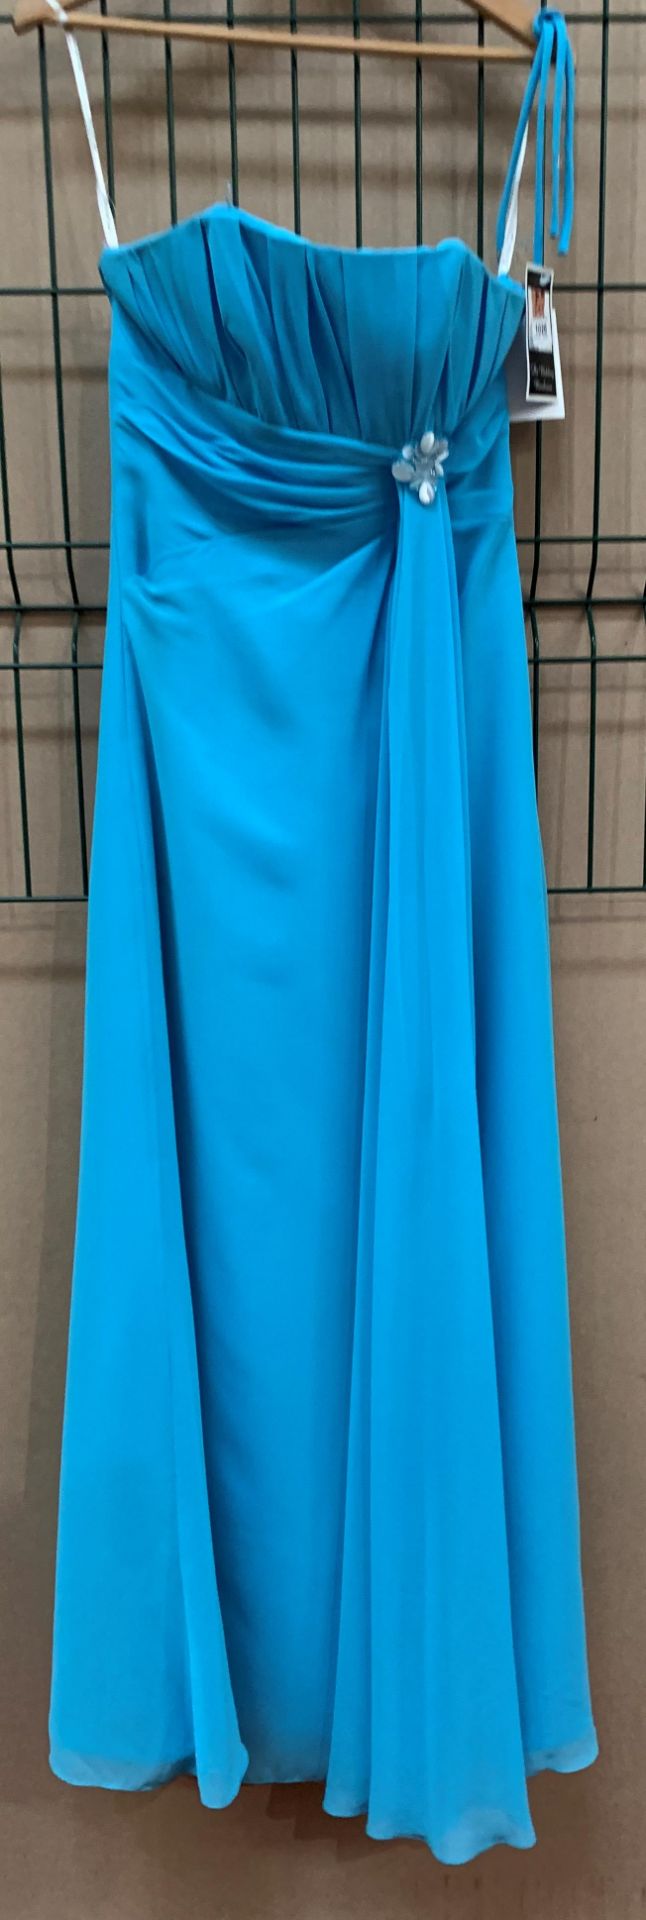 A bridesmaid/prom dress by Alexia Designs, model 4002, turquoise, size 8,